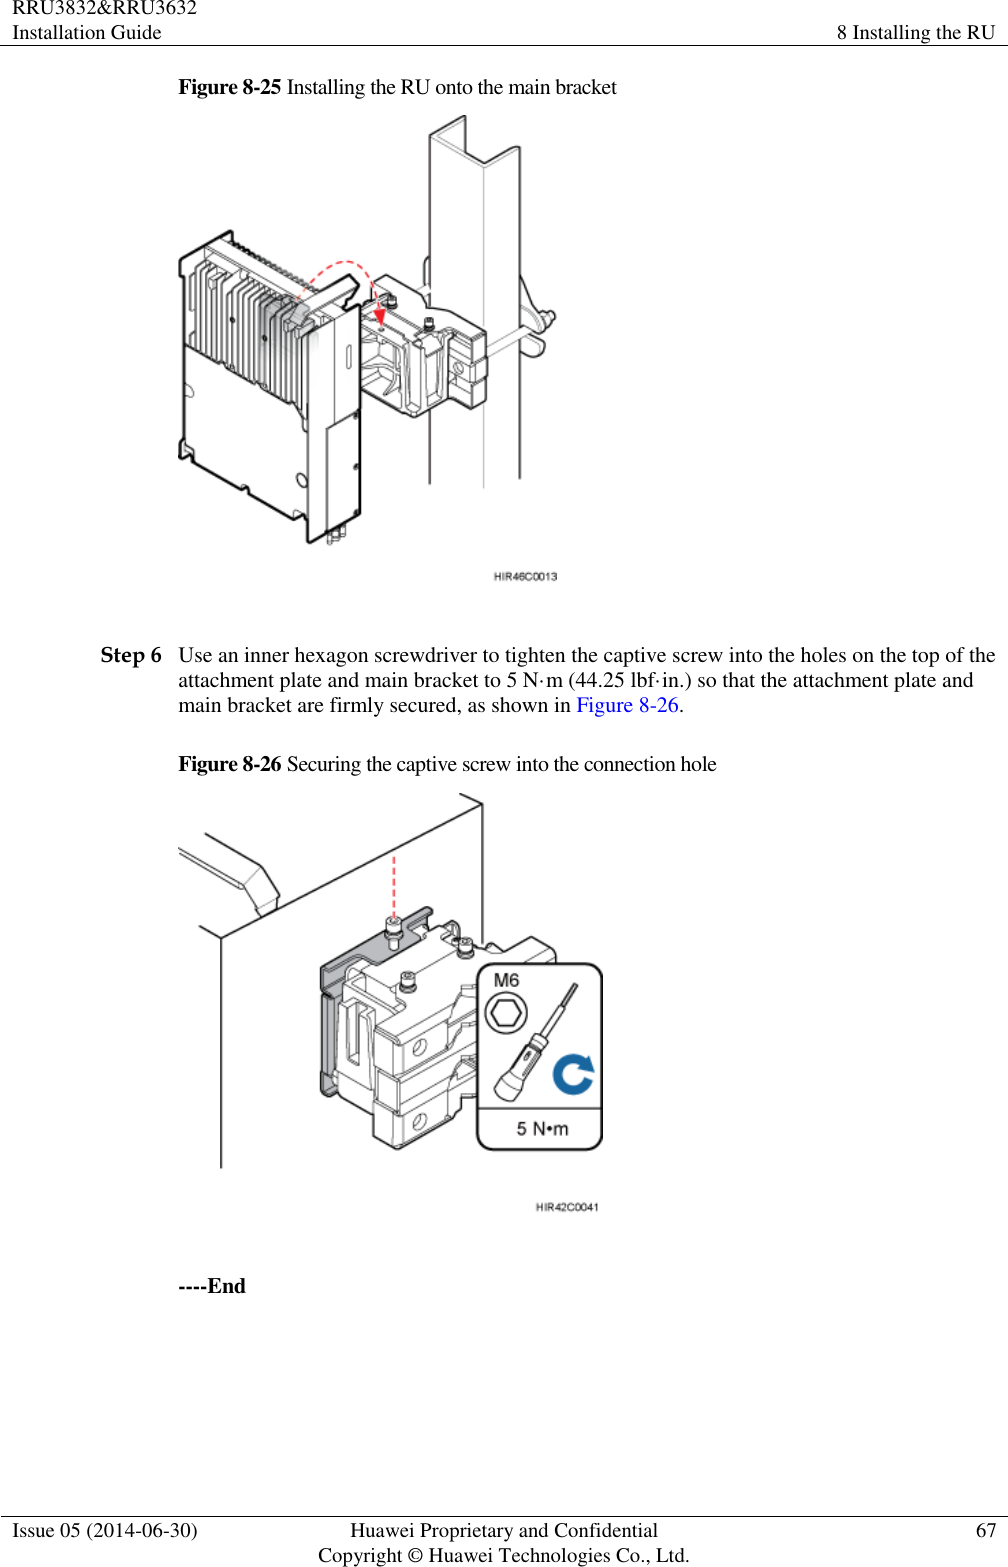 RRU3832&amp;RRU3632 Installation Guide 8 Installing the RU  Issue 05 (2014-06-30) Huawei Proprietary and Confidential                                     Copyright © Huawei Technologies Co., Ltd. 67  Figure 8-25 Installing the RU onto the main bracket   Step 6 Use an inner hexagon screwdriver to tighten the captive screw into the holes on the top of the attachment plate and main bracket to 5 N·m (44.25 lbf·in.) so that the attachment plate and main bracket are firmly secured, as shown in Figure 8-26. Figure 8-26 Securing the captive screw into the connection hole   ----End 